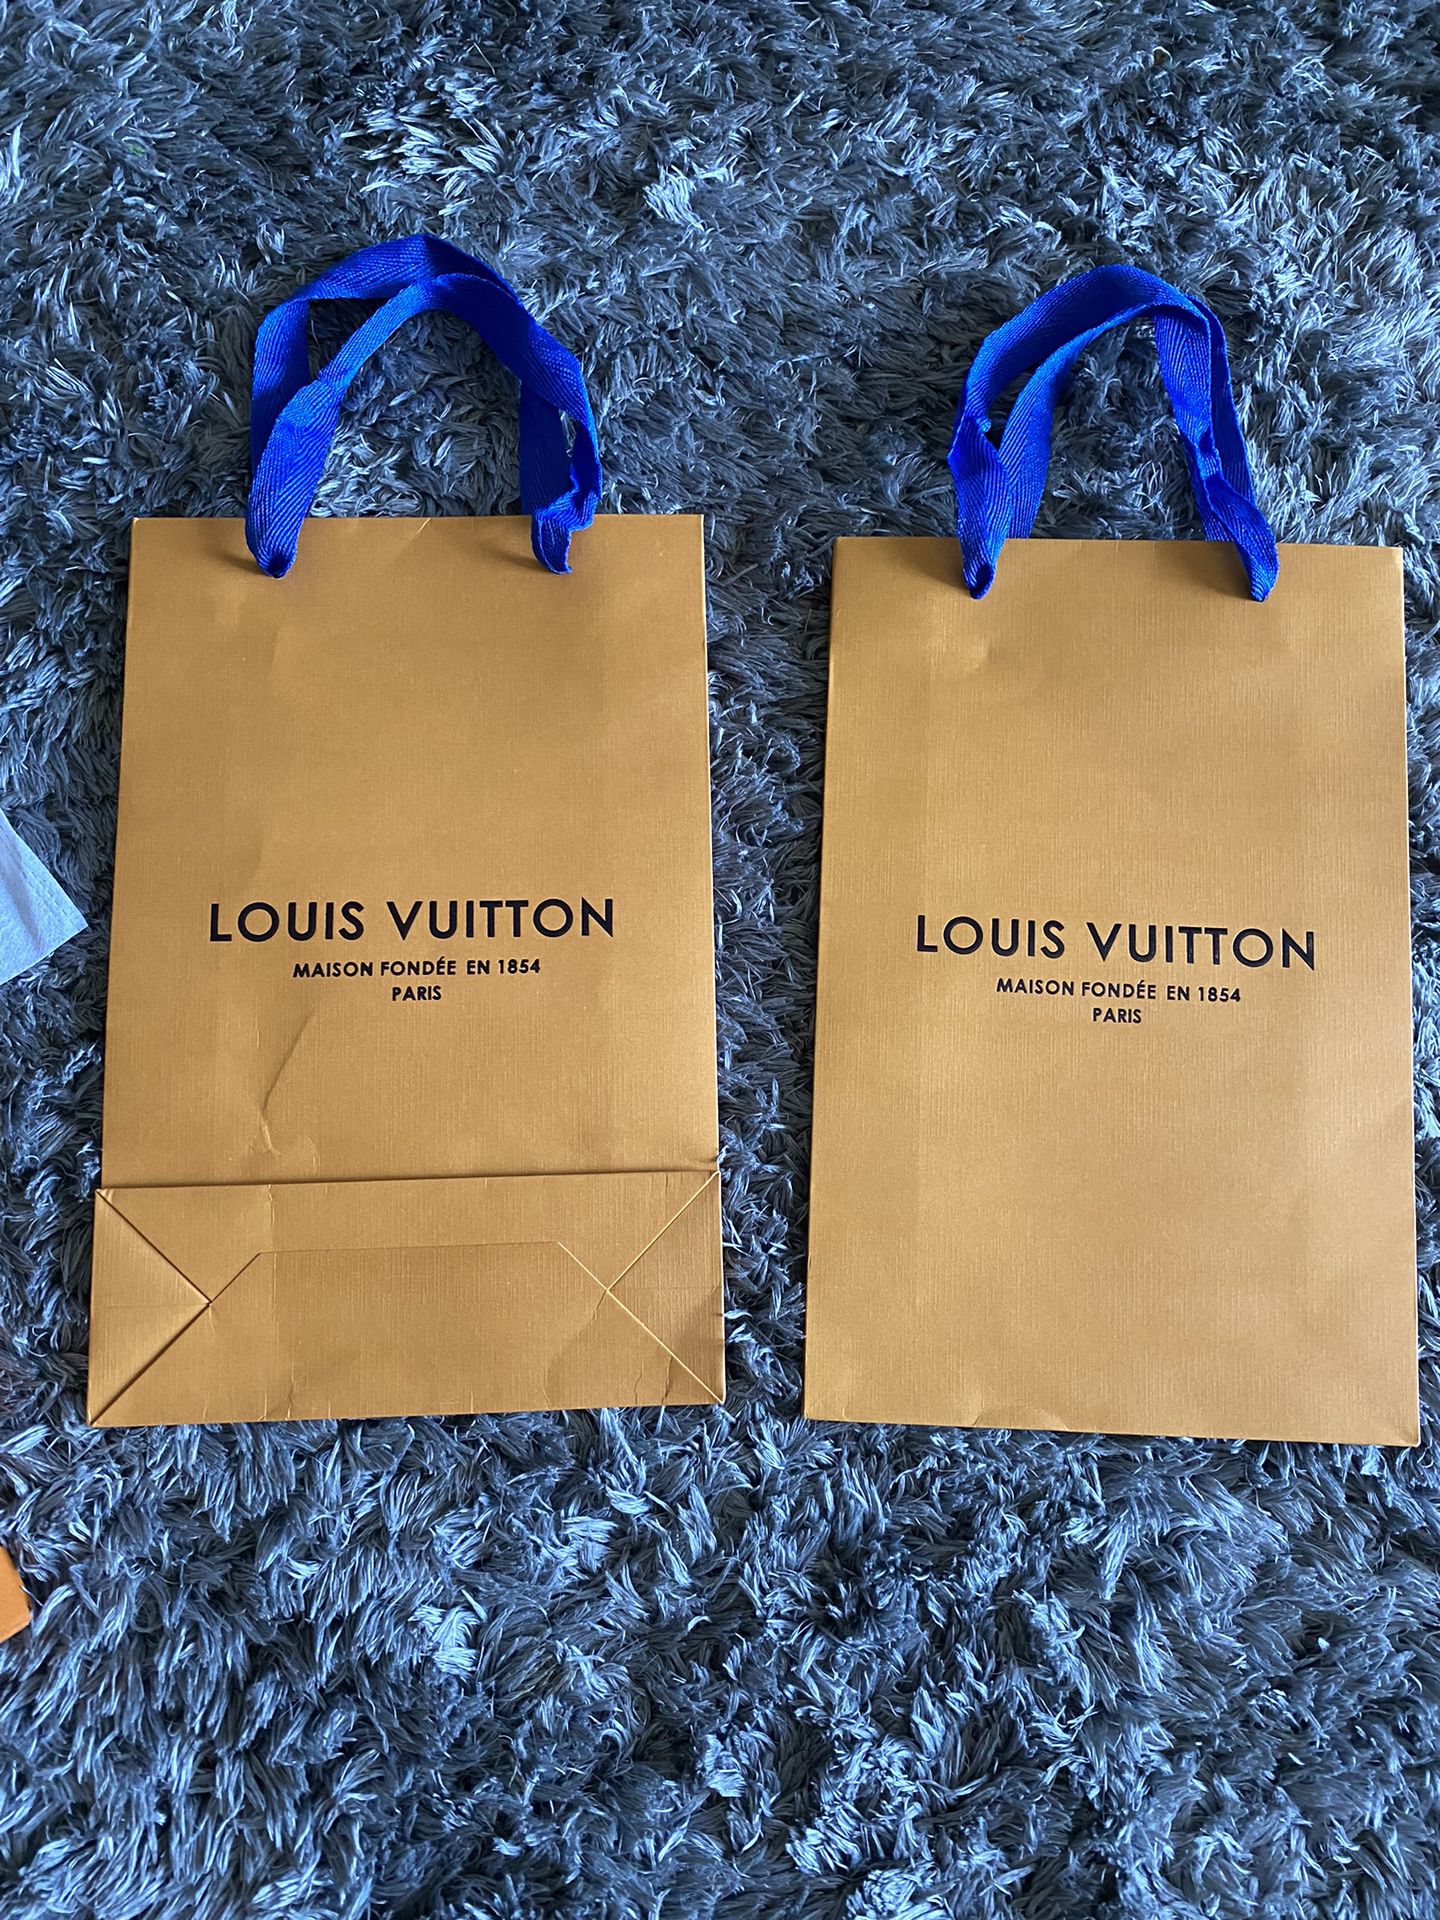 New Bags Lvs for Sale in San Diego, CA - OfferUp